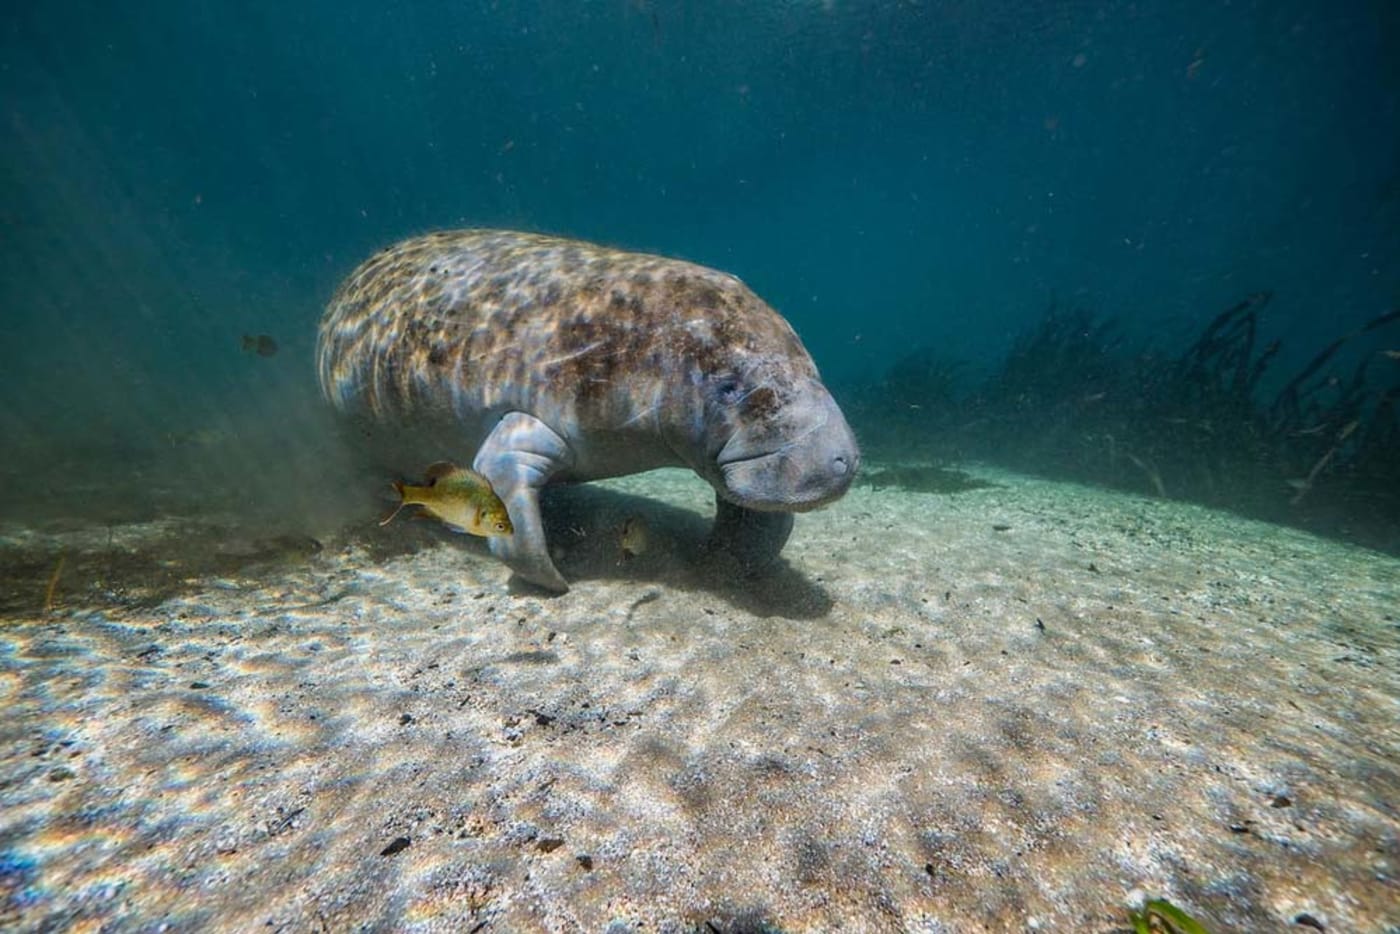 Manatee in the warm water of Florida